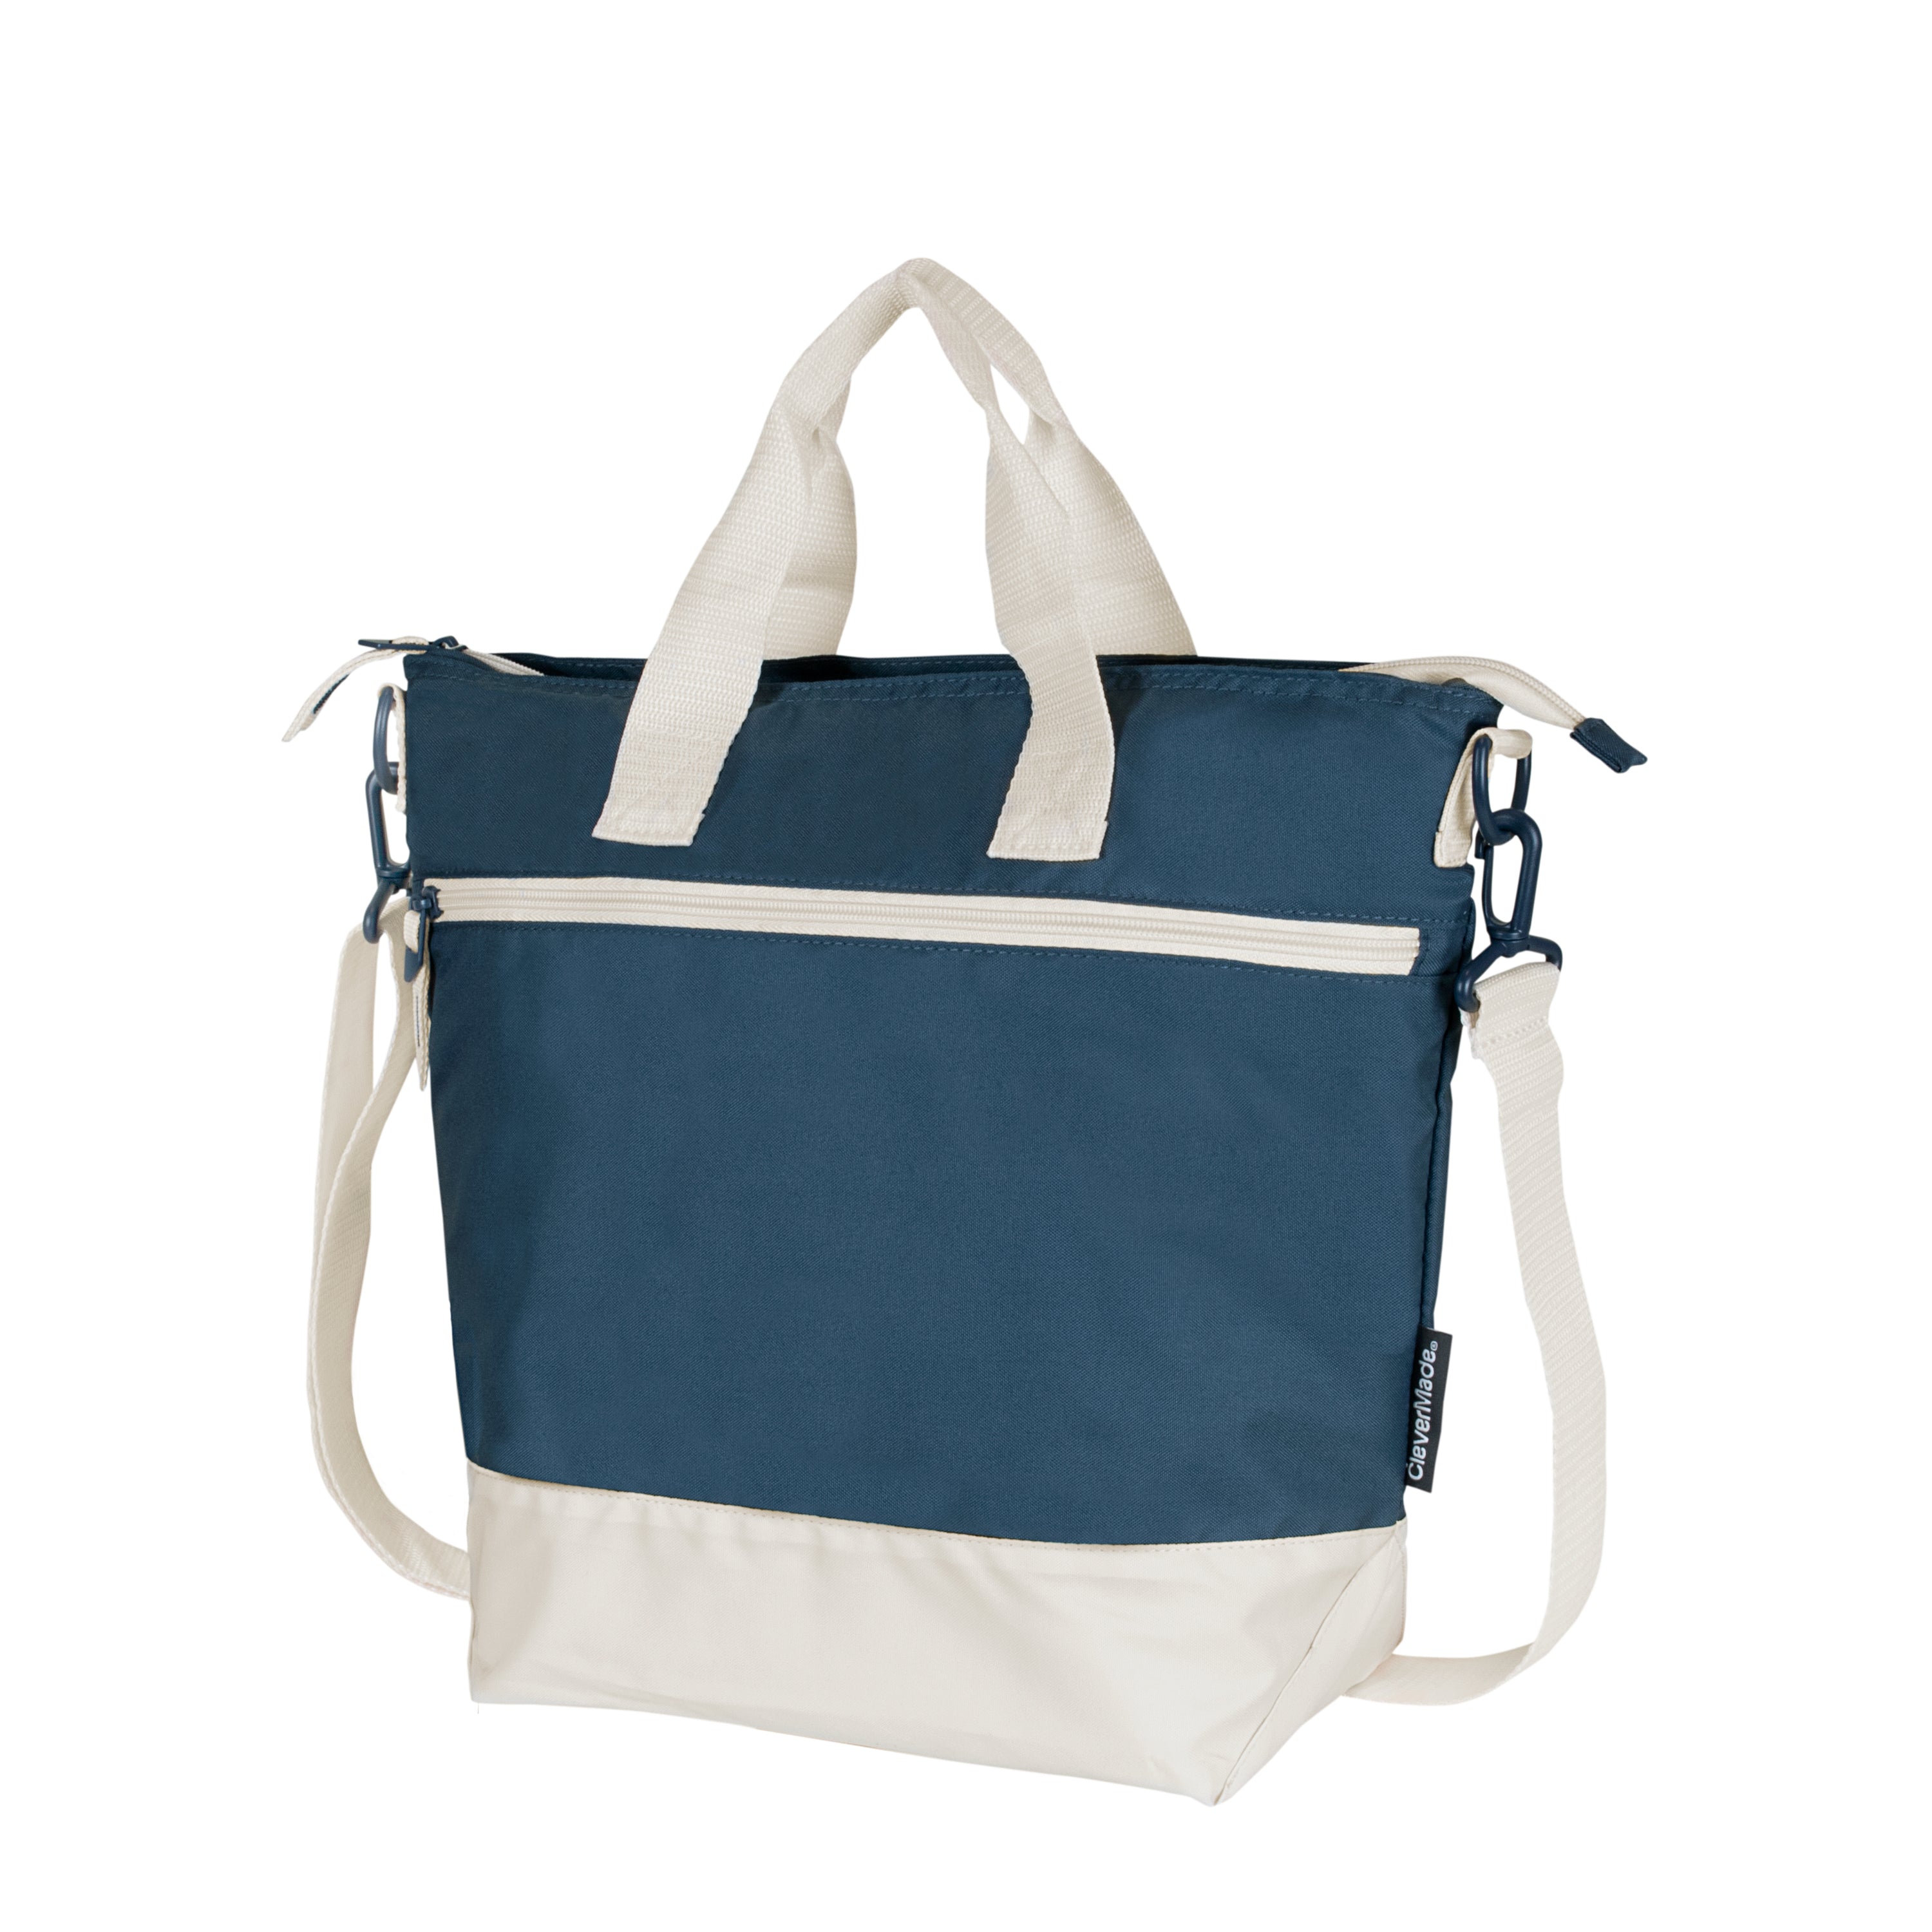 Clevermade 12 Can Soft Sided Cooler Tote, Navy Cream, Adult Unisex, Blue